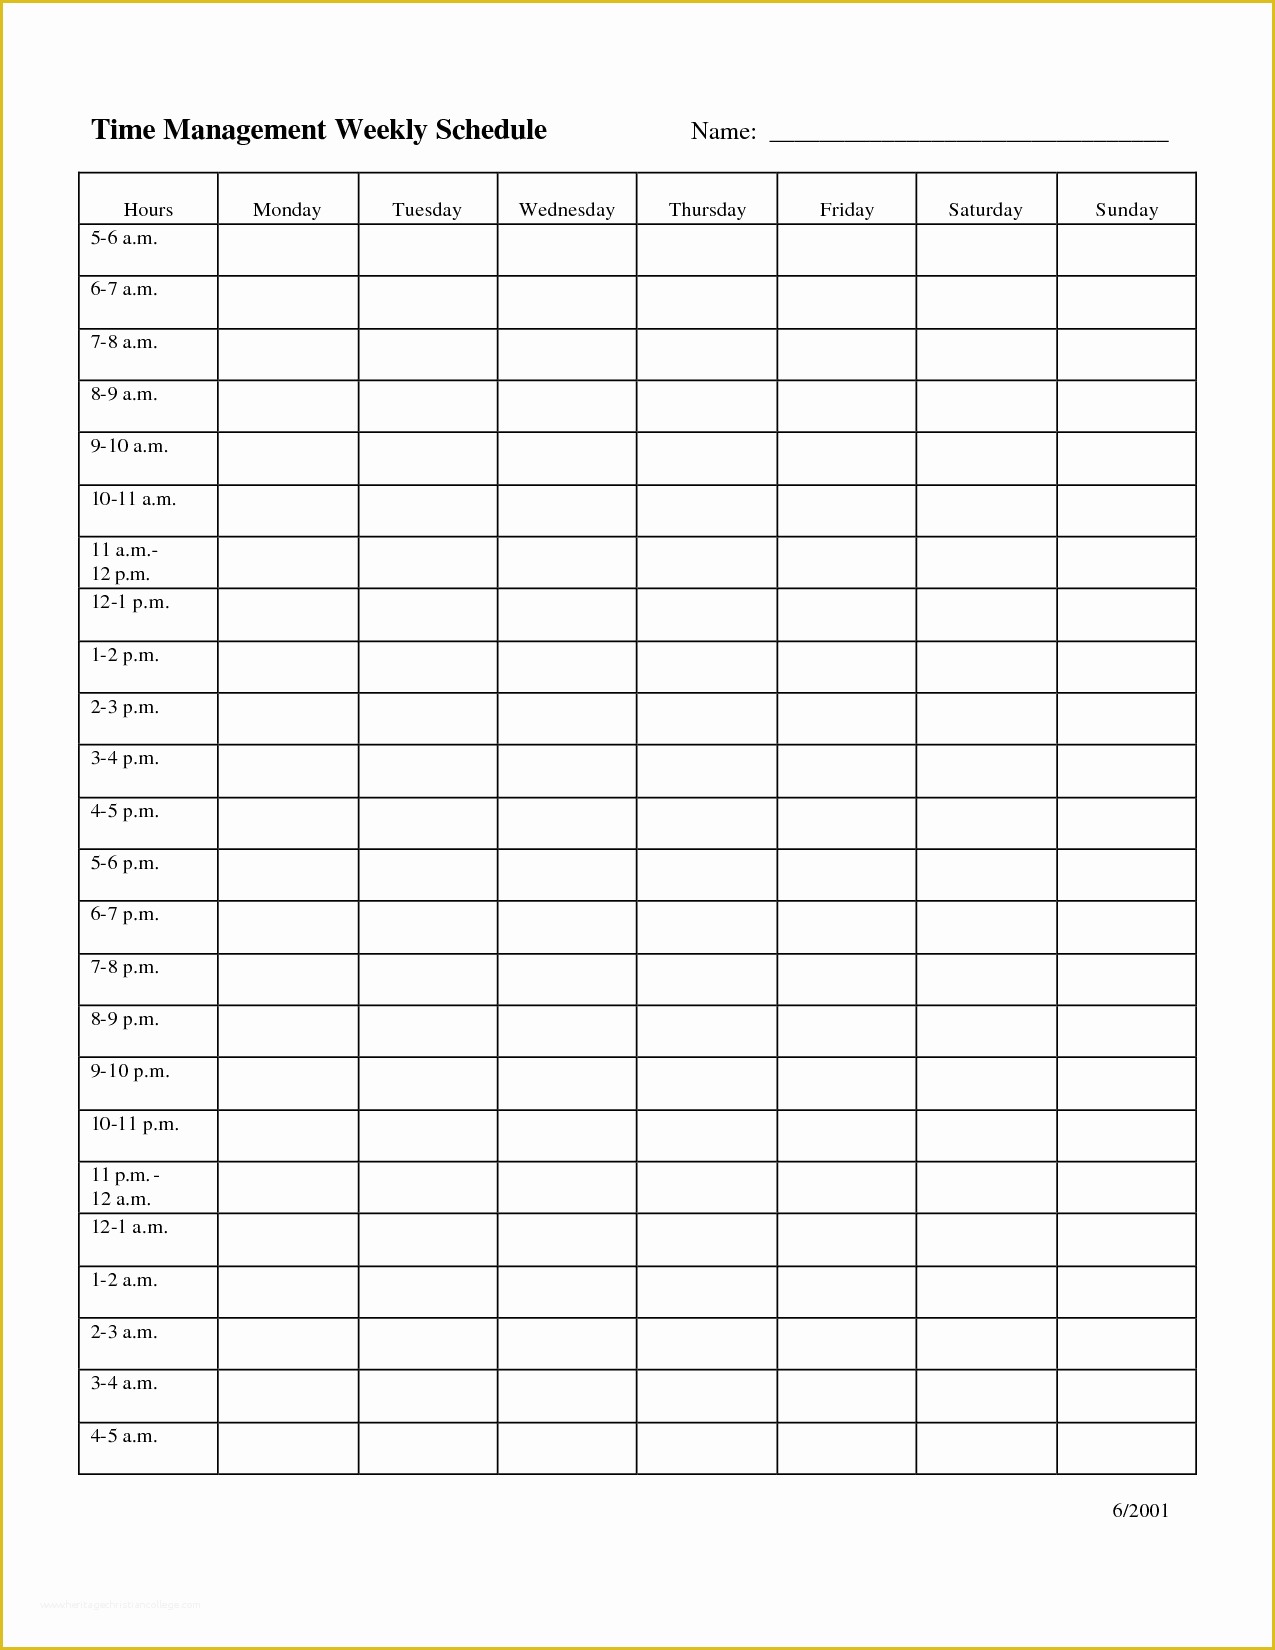 Time Management Excel Template Free Of Time Management Weekly Schedule Template …